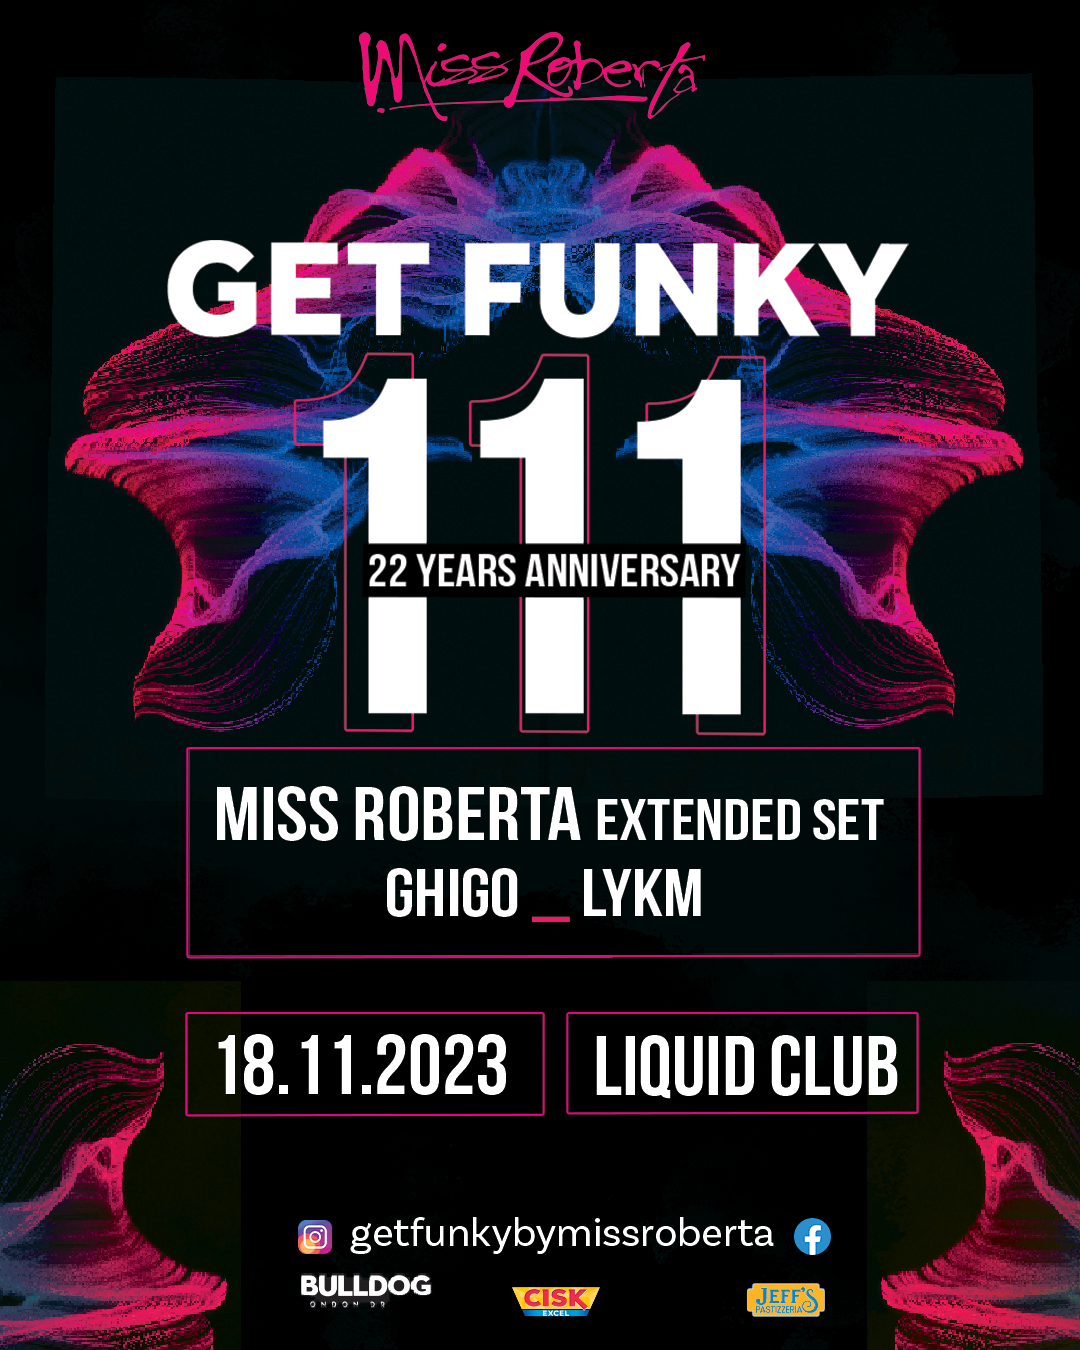 GET FUNKY - 22 YEARS ANNIVERSARY ON SATURDAY 18TH NOVEMBER AT LIQUID CLUB poster